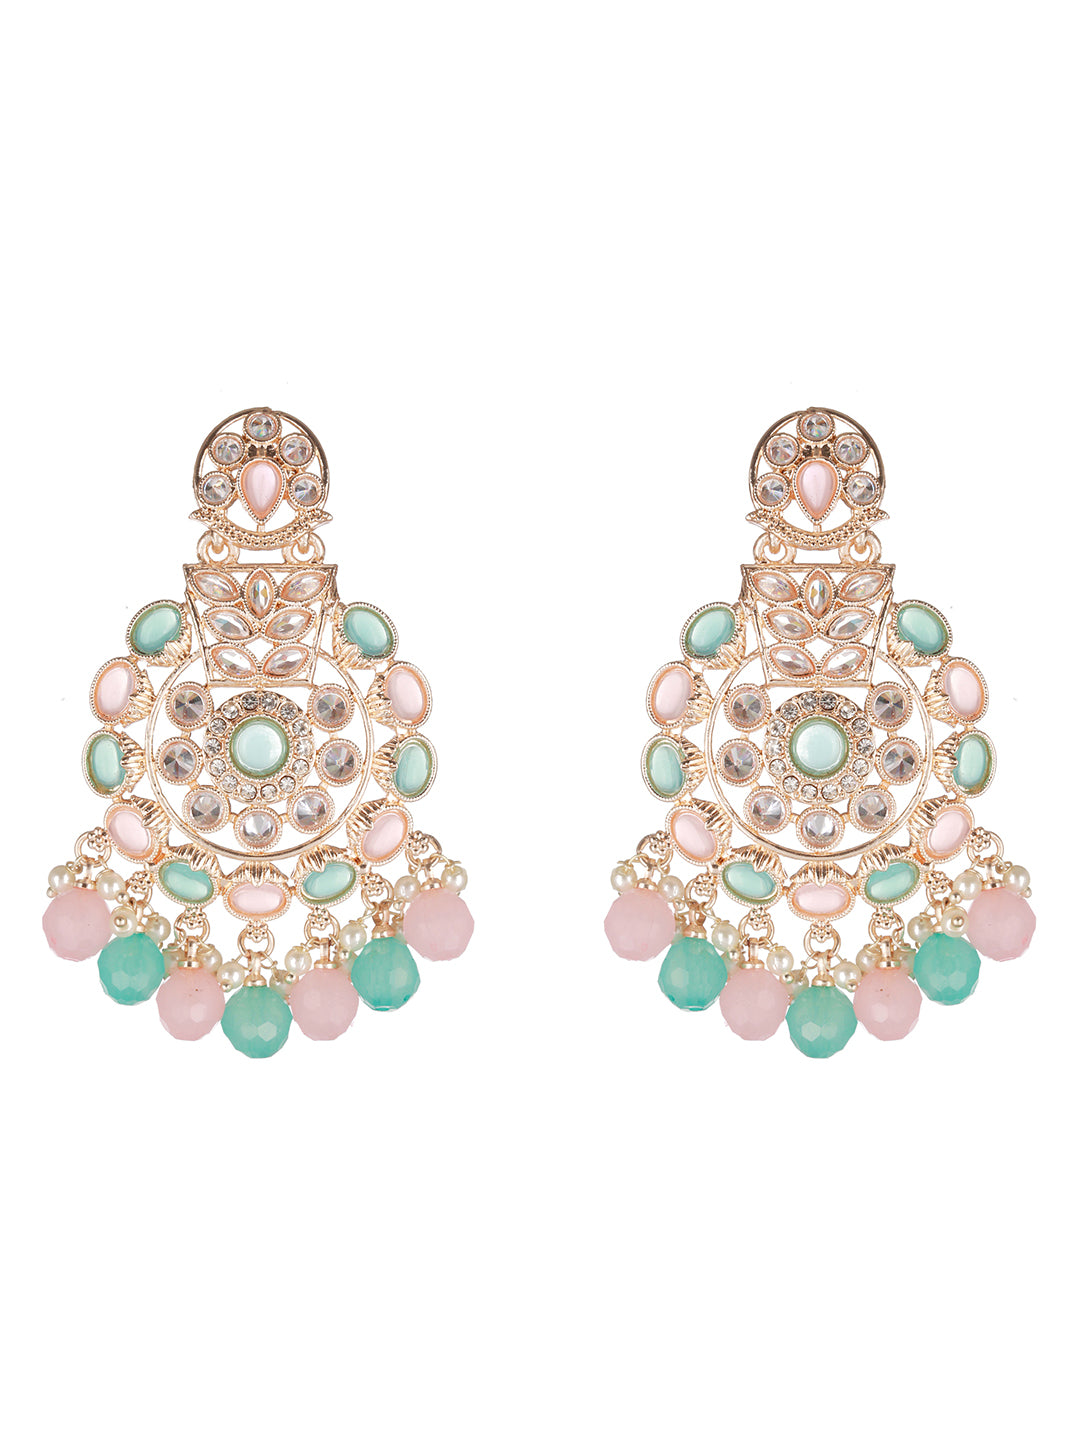 Pretty Pastel-Toned Floral Studded Gold-Plated Drop Earrings